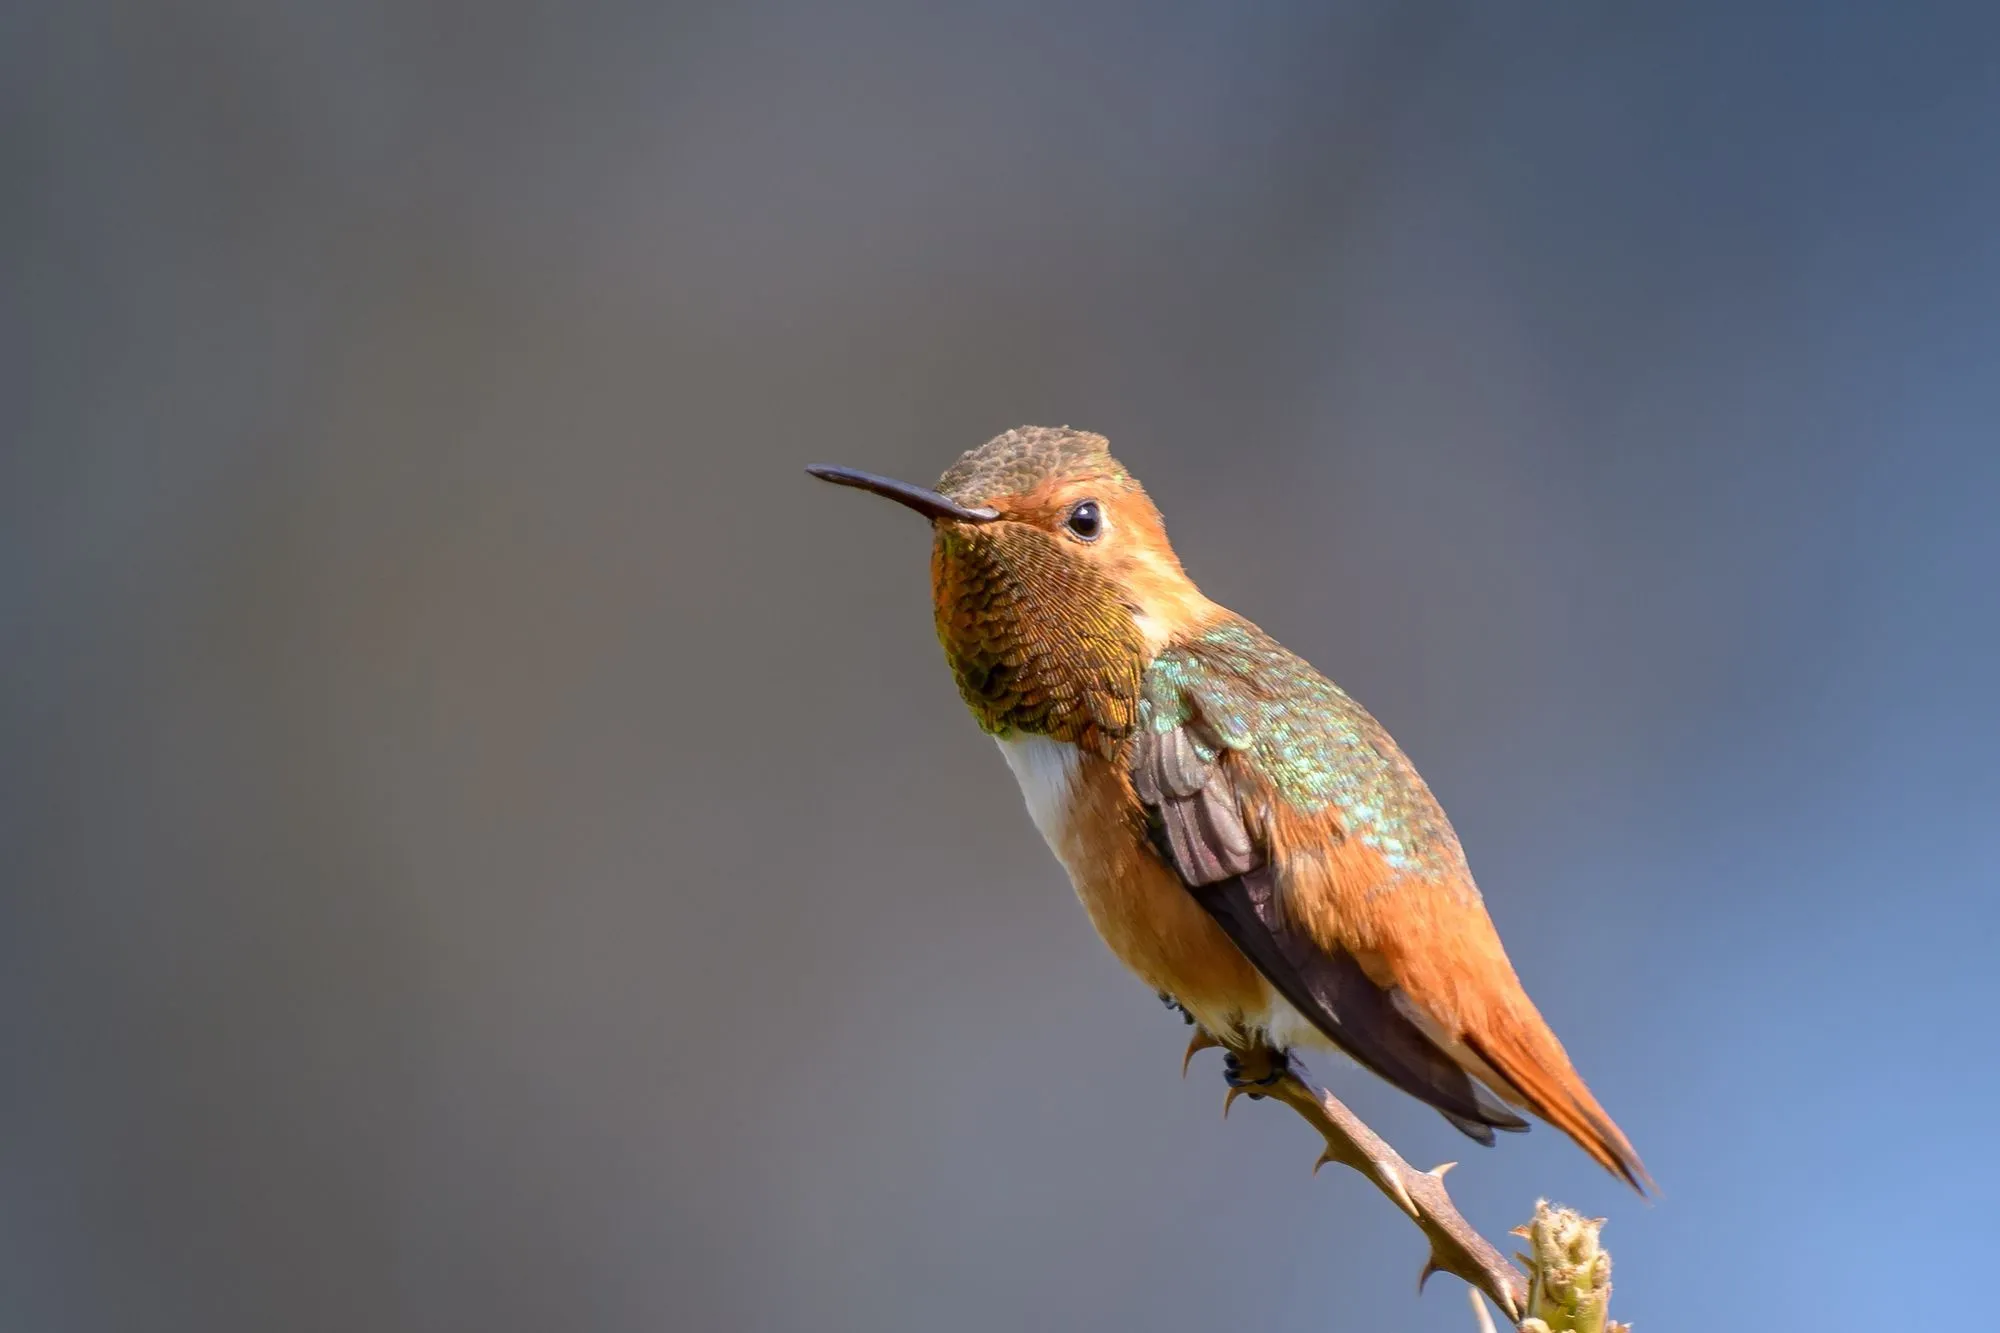 The Allen's hummingbird is so similar to the rufous hummingbird that it is almost impossible to distinguish them.